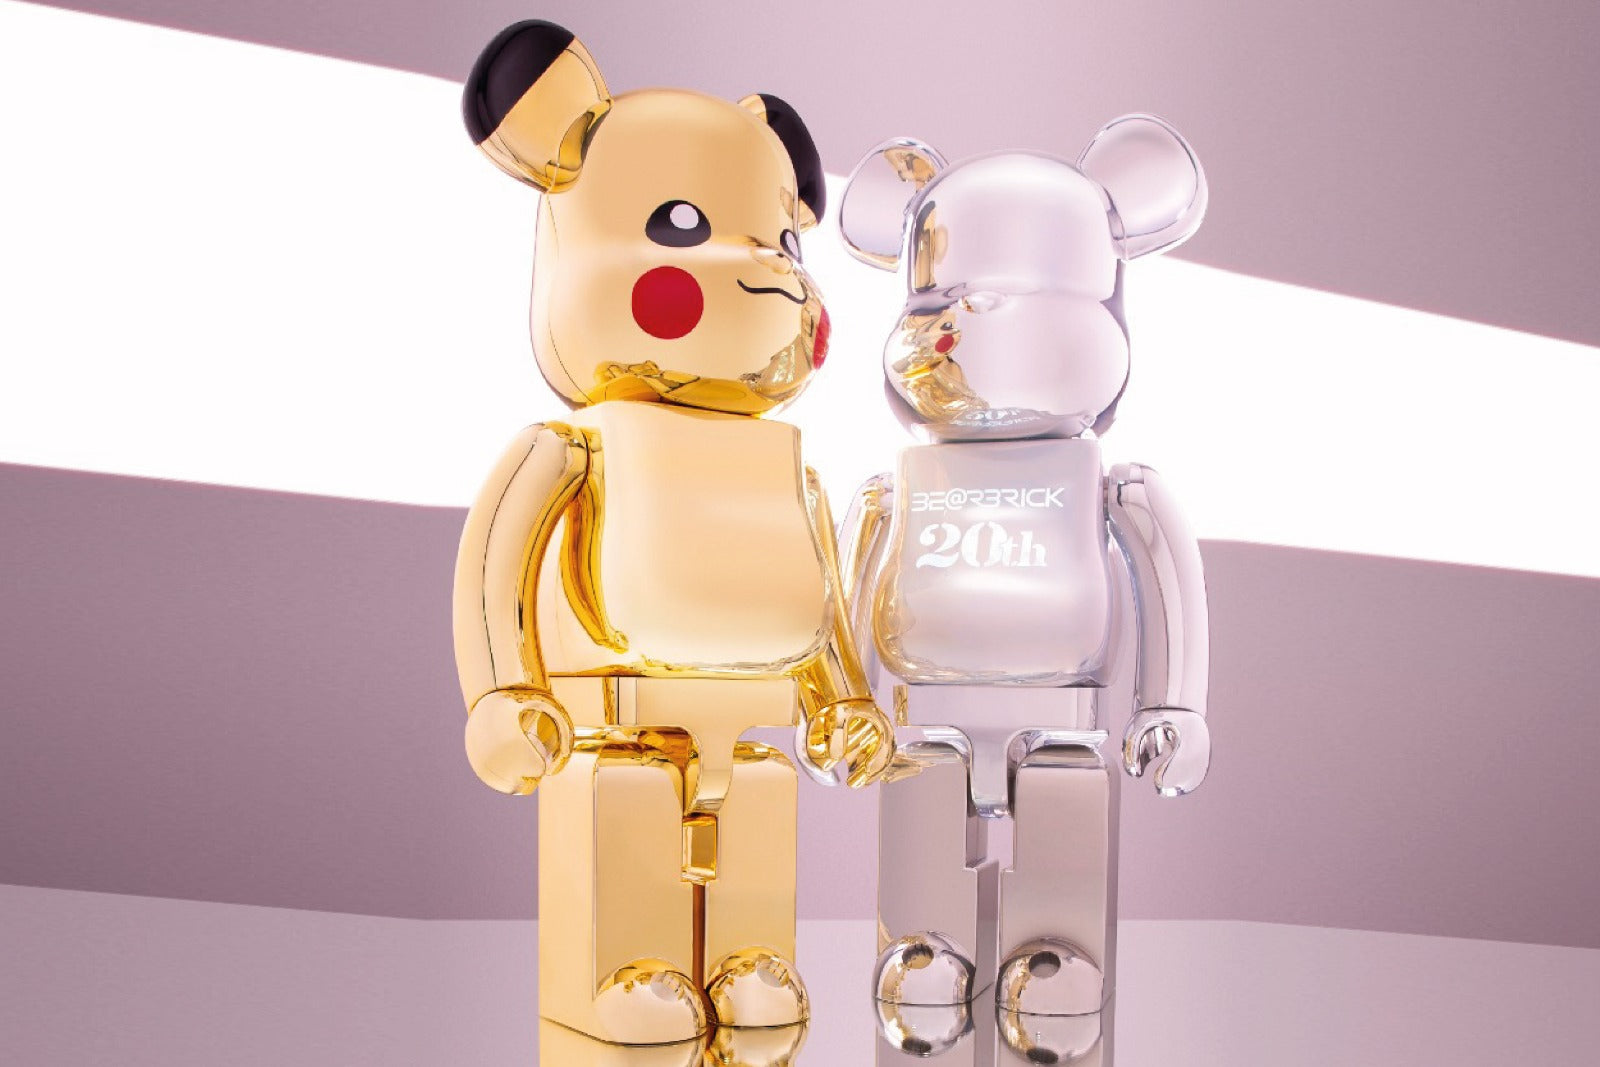 MEDICOM TOY: The BE@RBRICK WORLD WIDE TOUR 3 Arrives at JUICE